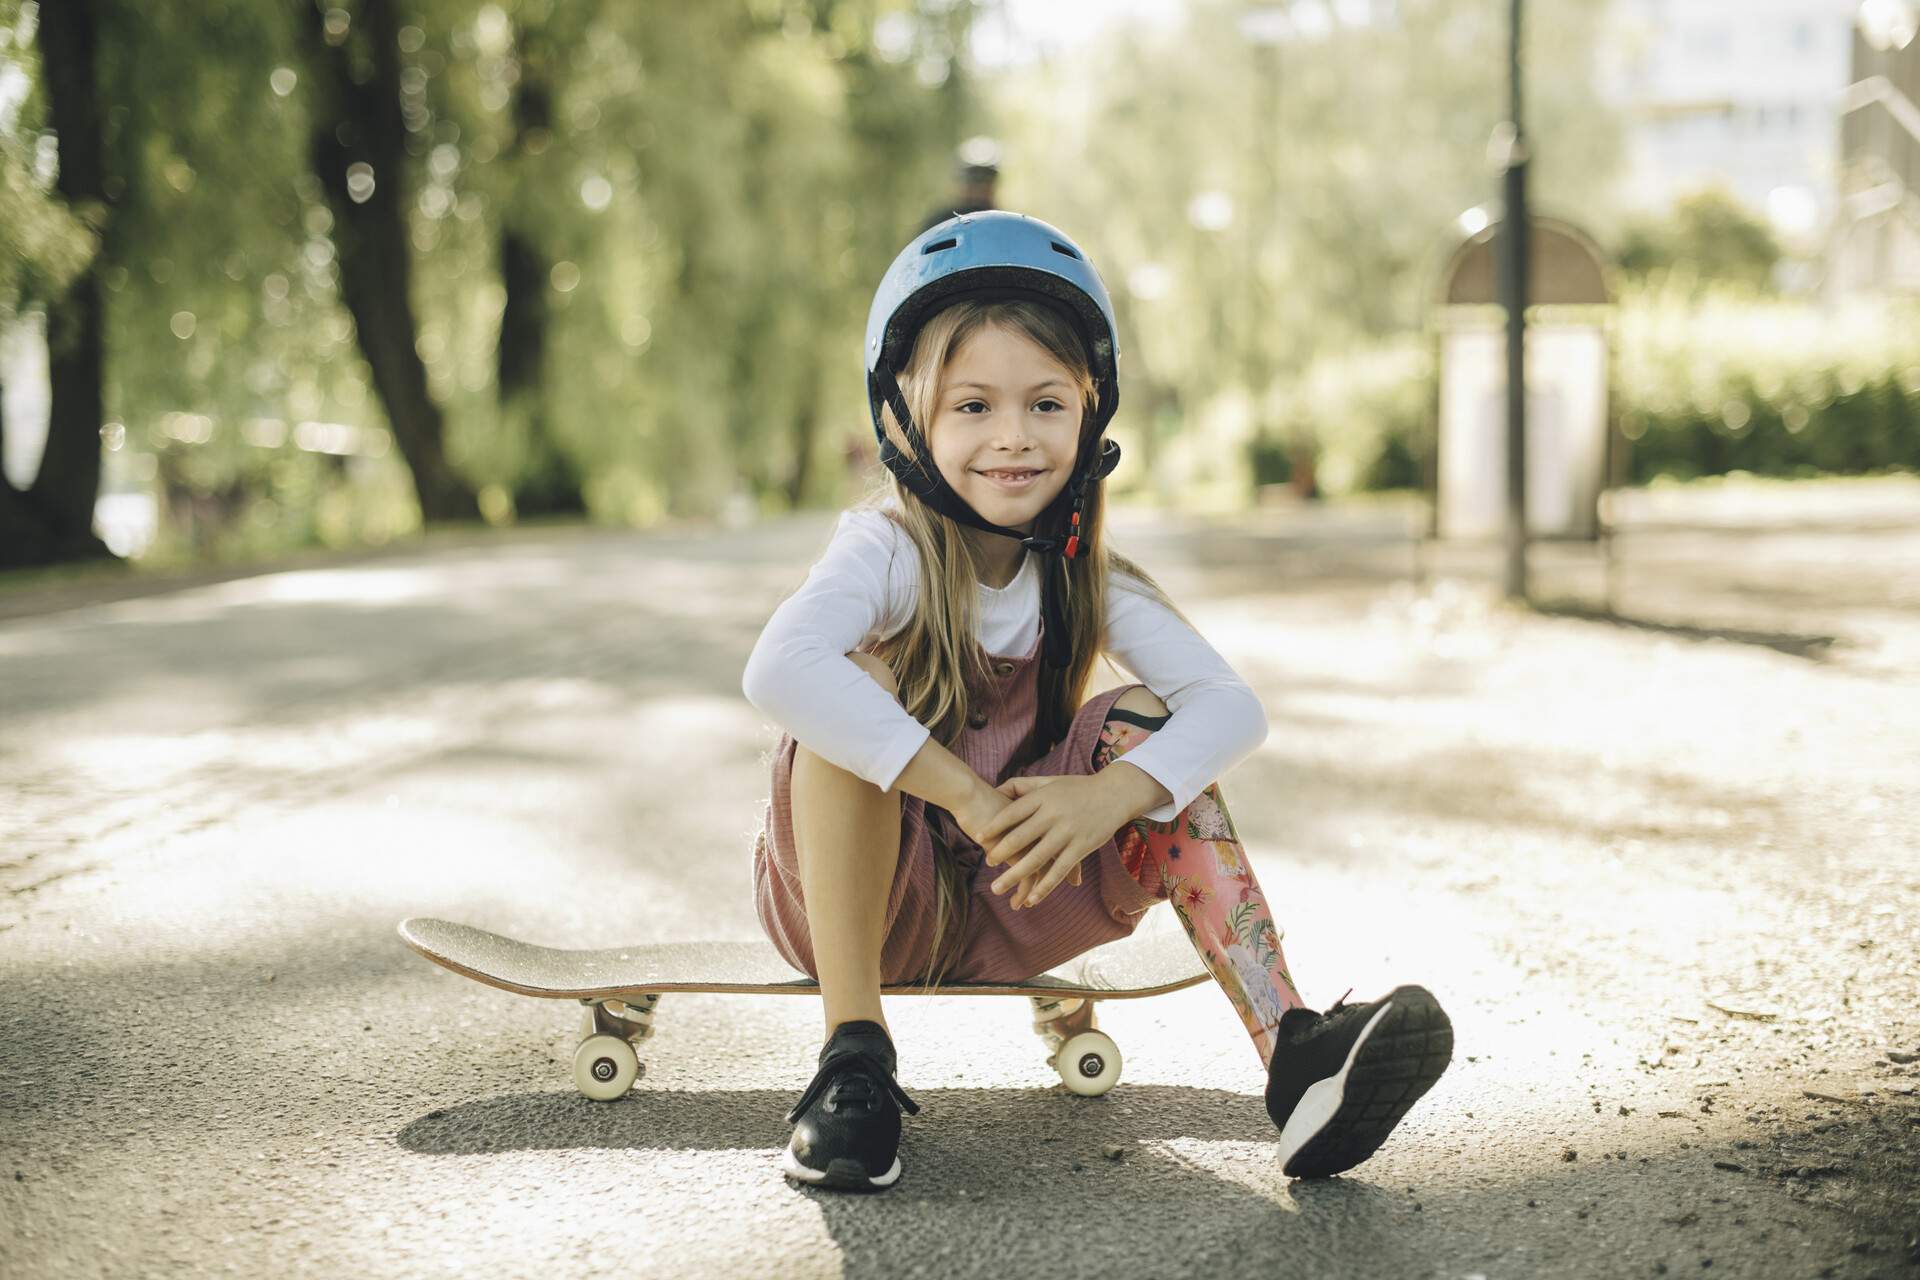 A young girl with a prosthetic leg and a blue helmet sitting on a skateboard